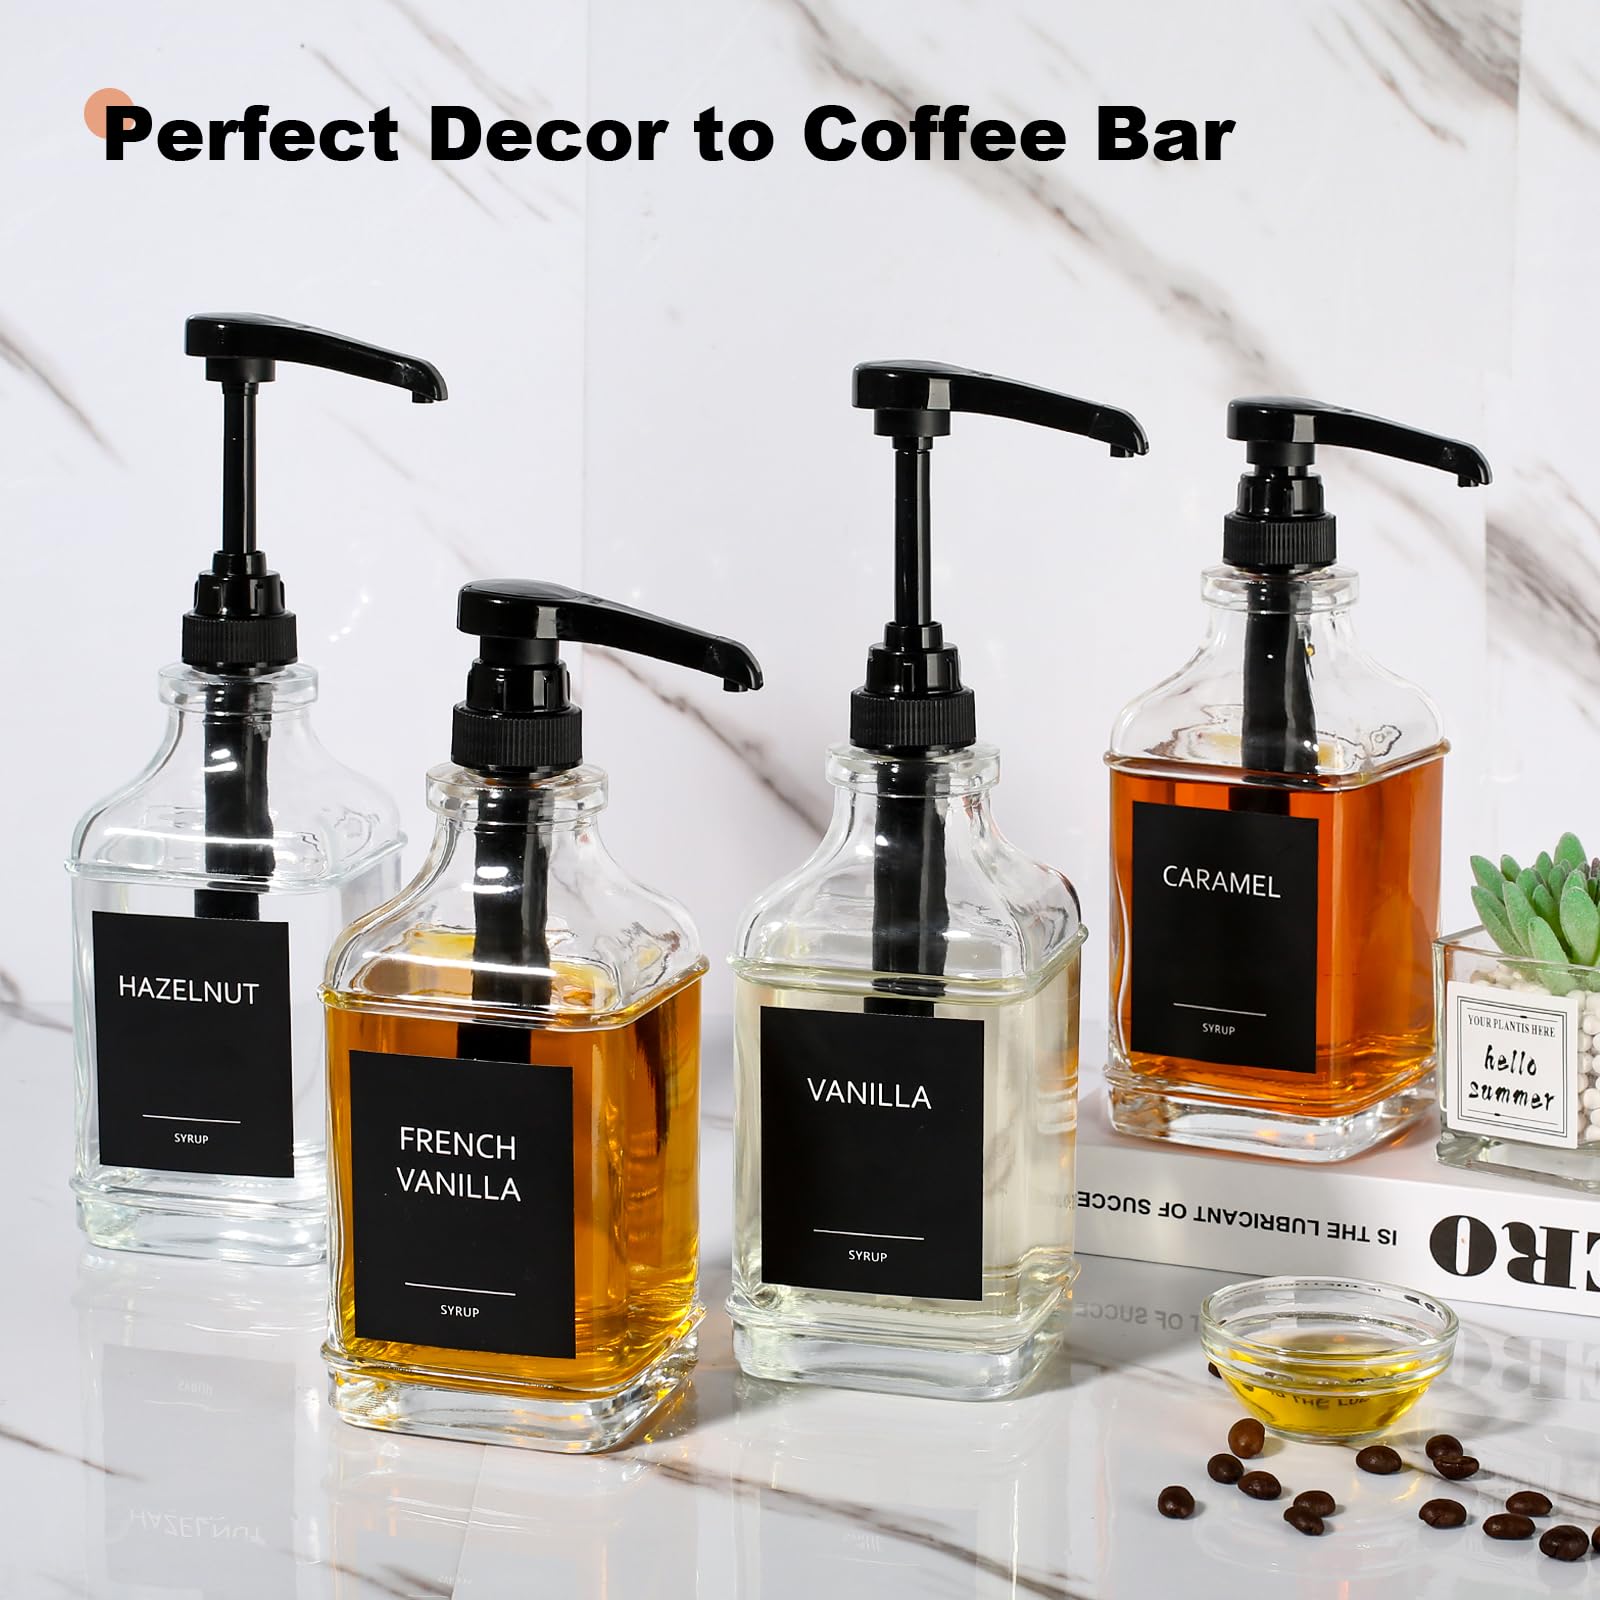 GMISUN Coffee Syrup Dispenser for Coffee Bar, Square Glass Syrup Dispenser with 1/4oz Large Capacity Pump, Coffee Syrup Pump Dispenser, Coffee Bar Accessories, Organizer, Decor, Black, 16oz, 4 Pack